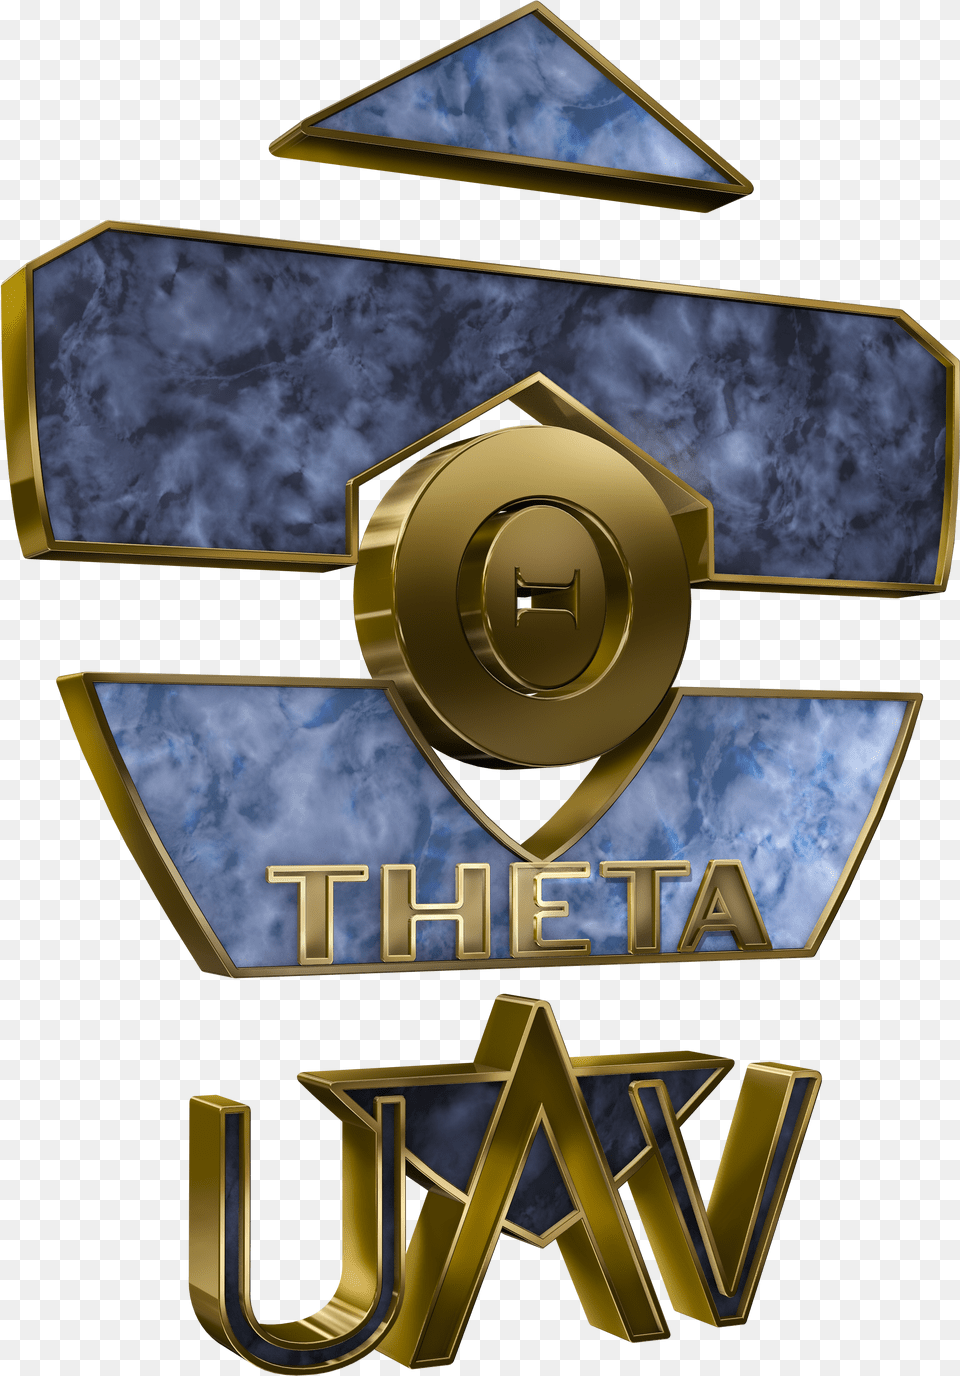 Theta Uav, Electrical Device, Switch Png Image